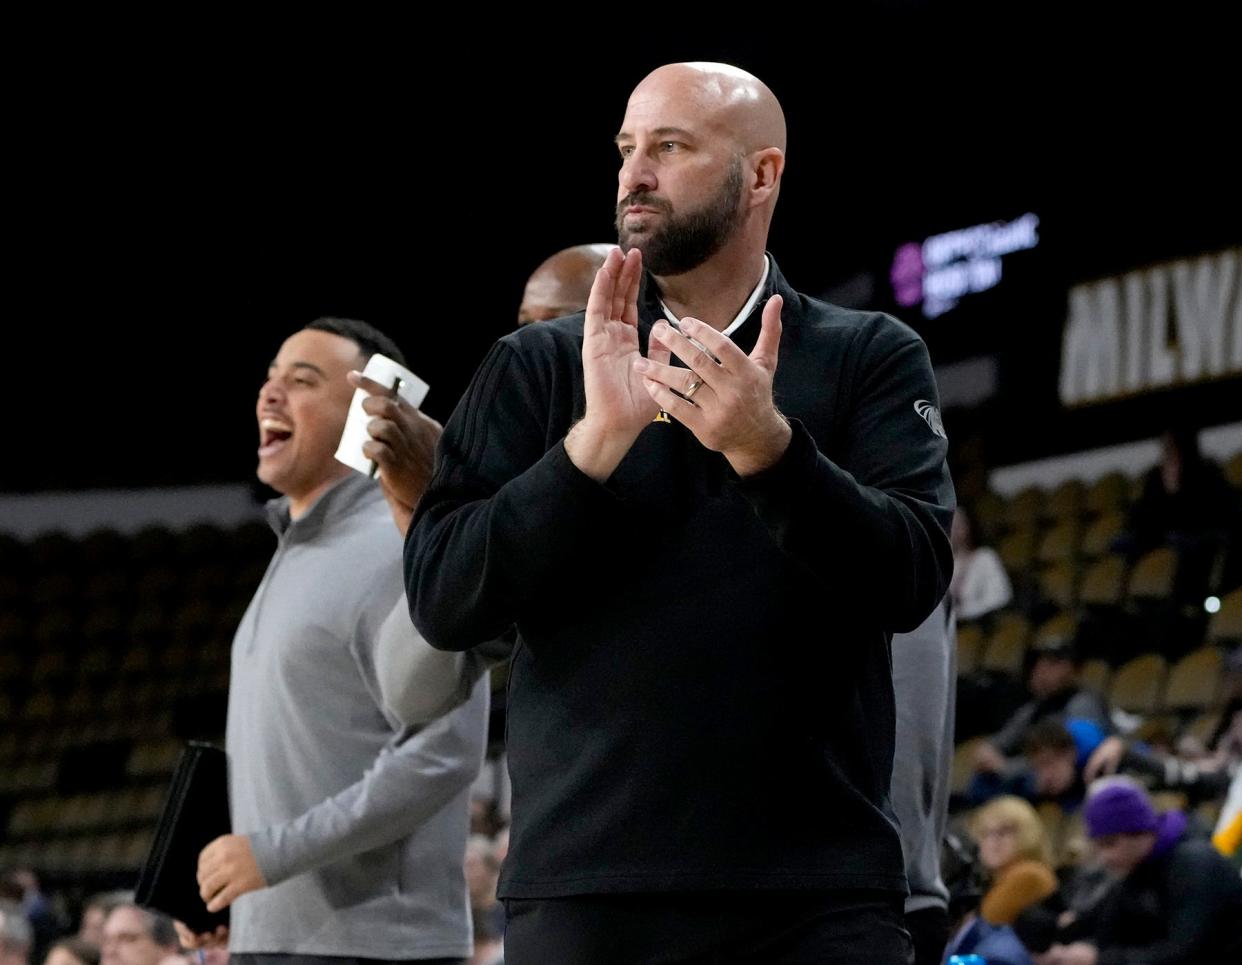 Bart Lundy has added more talent to UWM's incoming recruiting class, but he has two more spots left to fill.